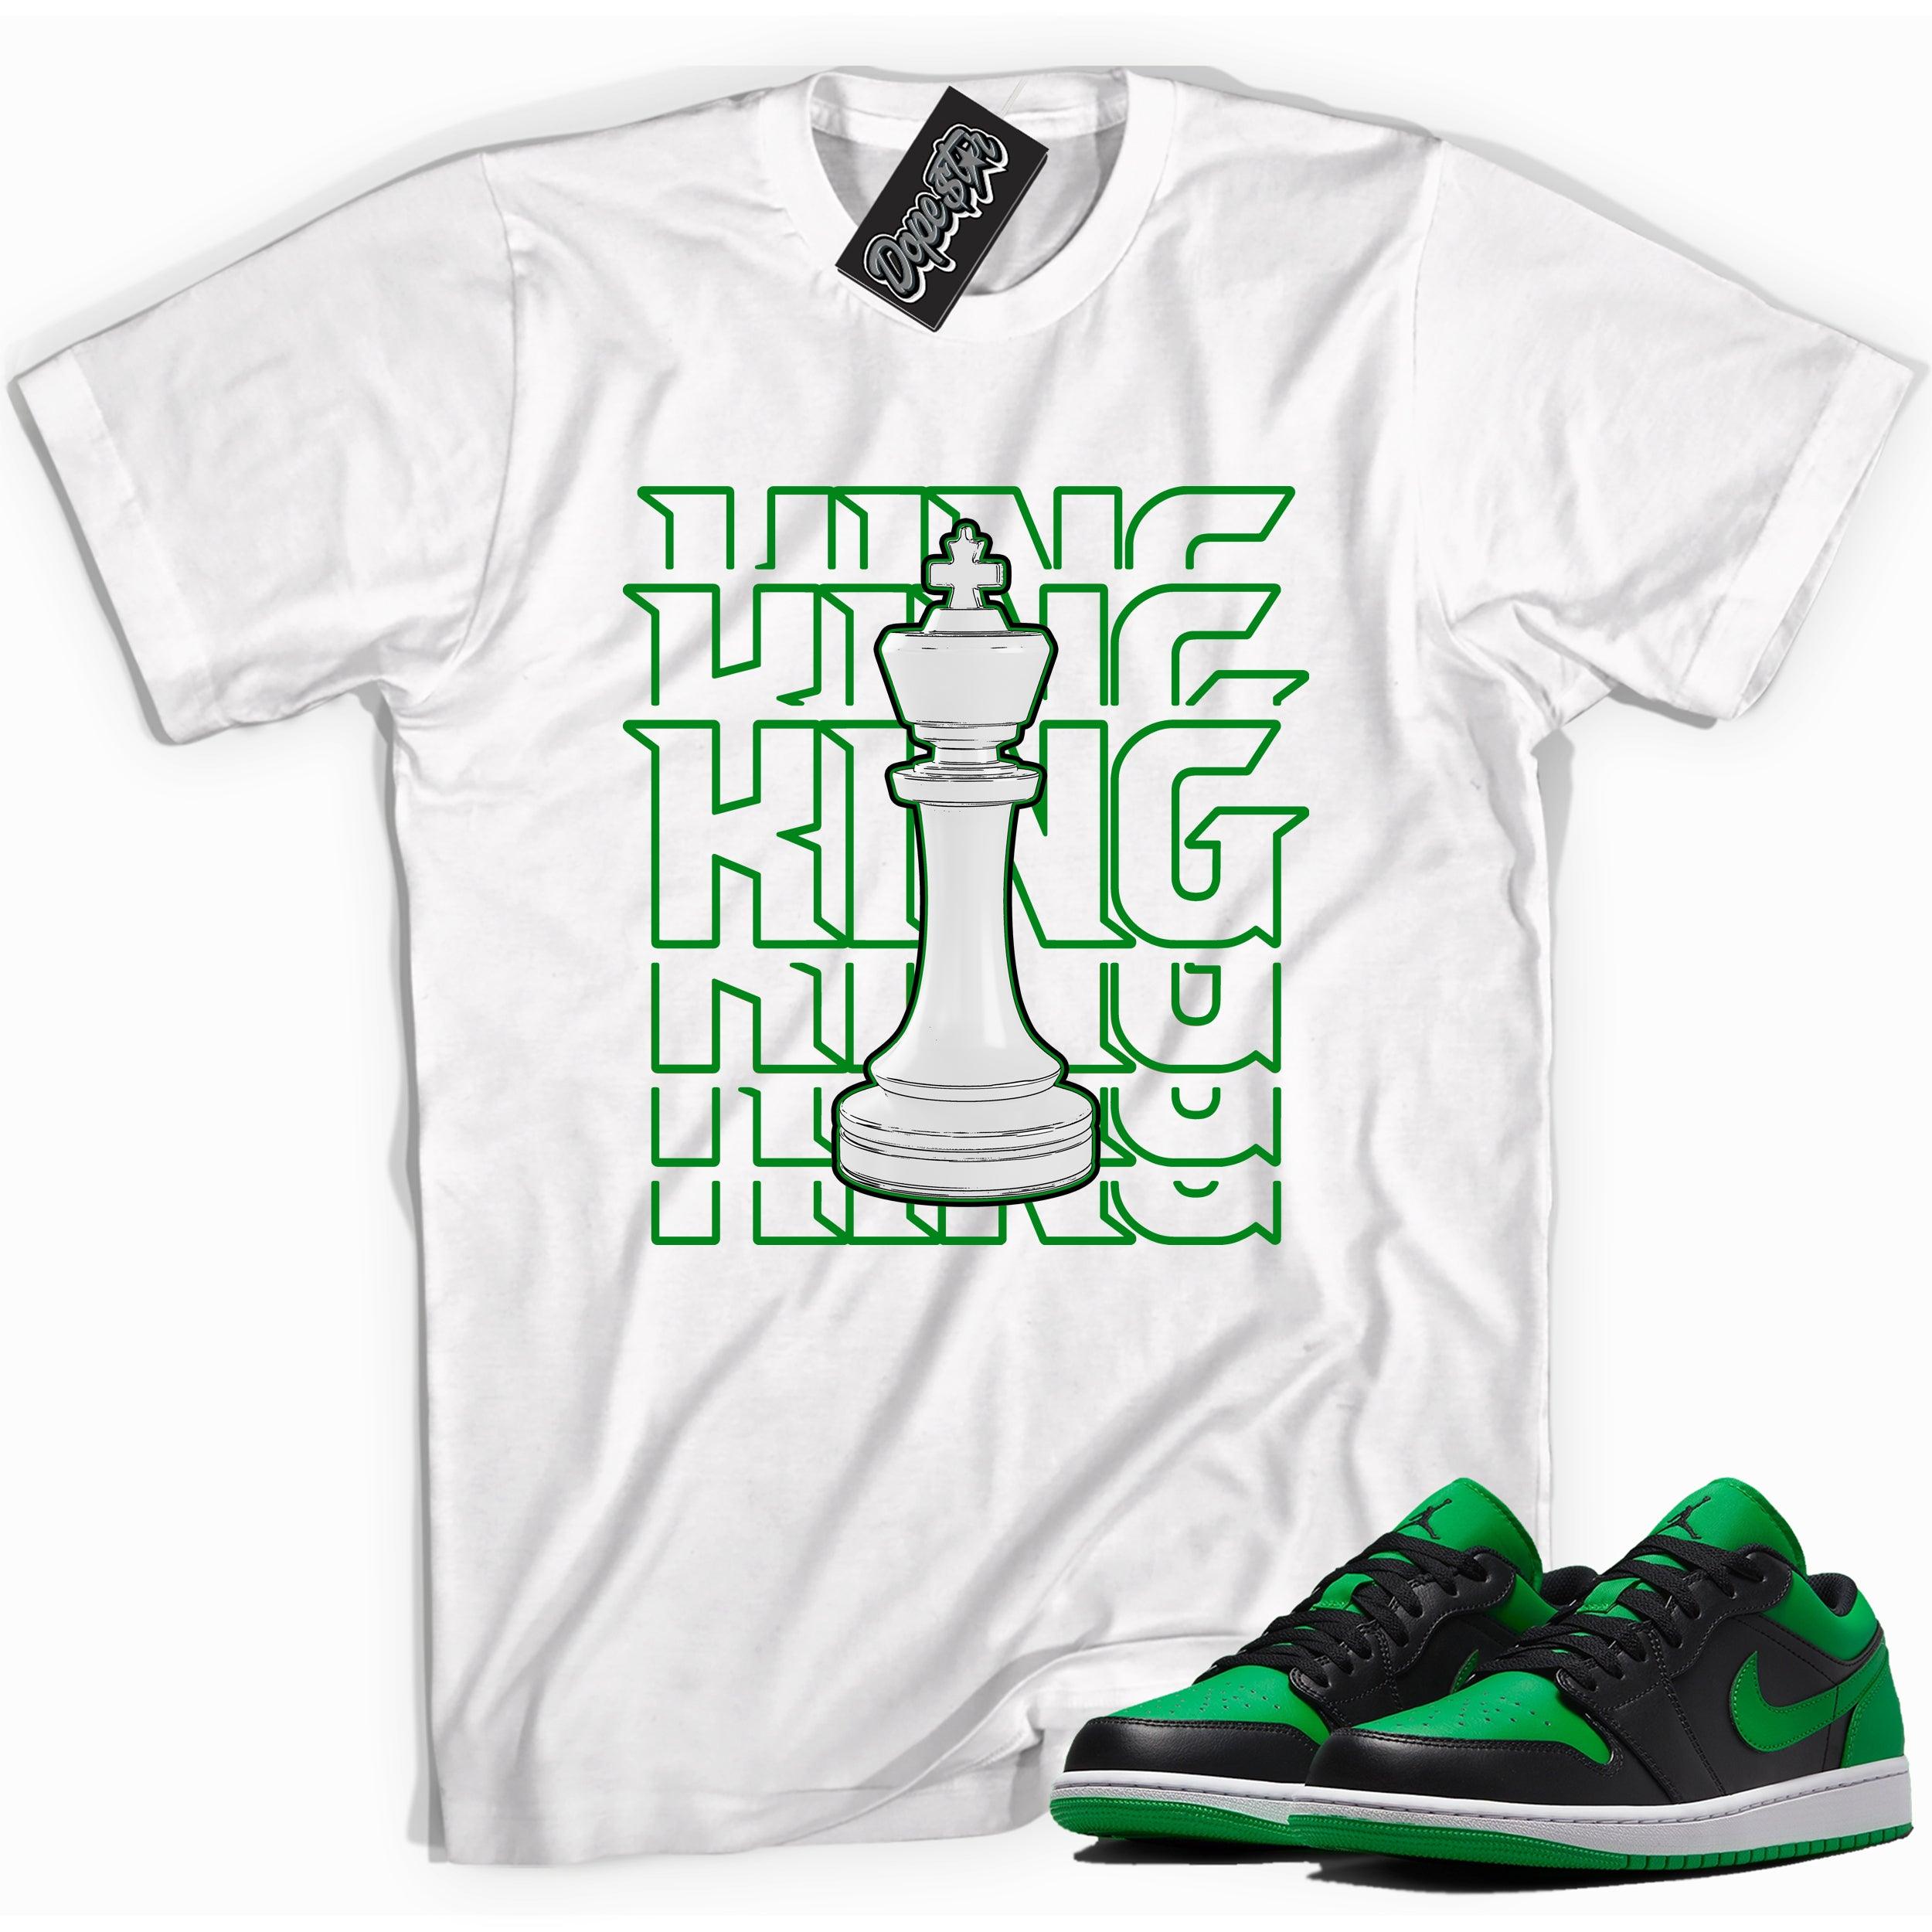 Cool white graphic tee with 'King' print, that perfectly matches Air Jordan 1 Low Lucky Green sneakers